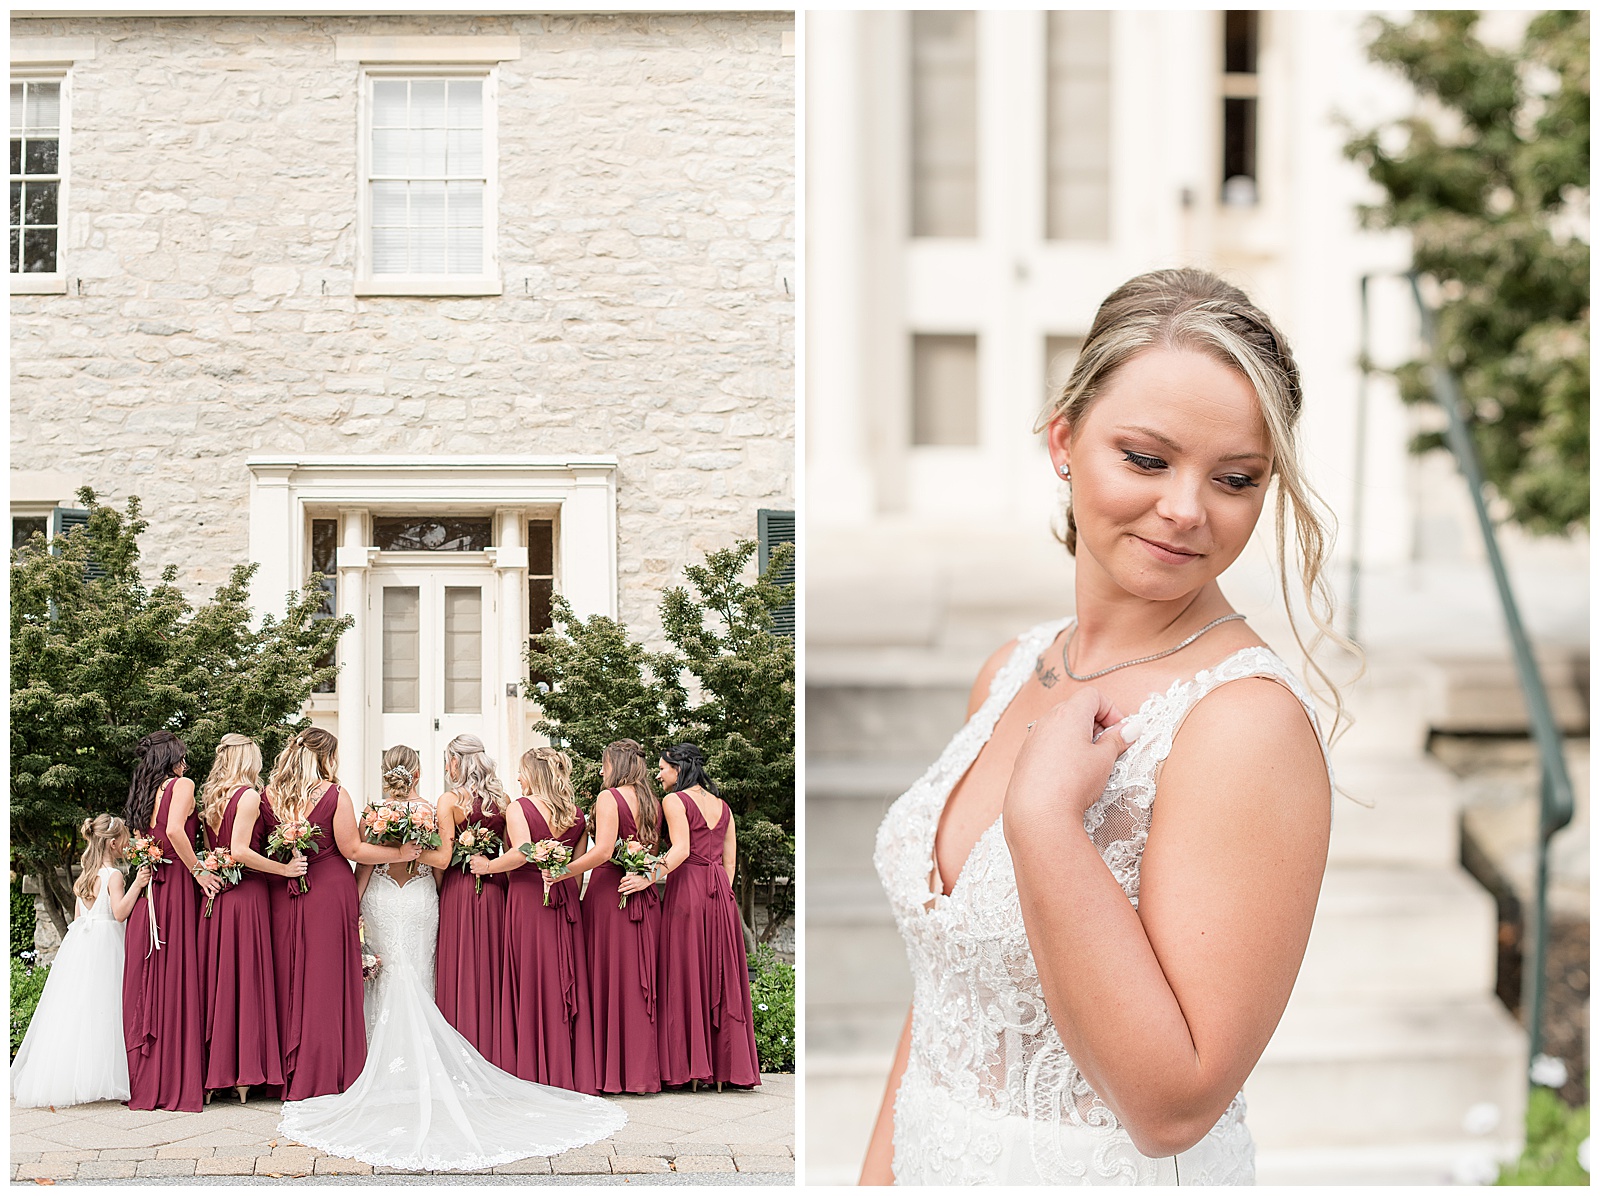 bride with bridesmaids in maroon dresses with backs to camera in front of stone building